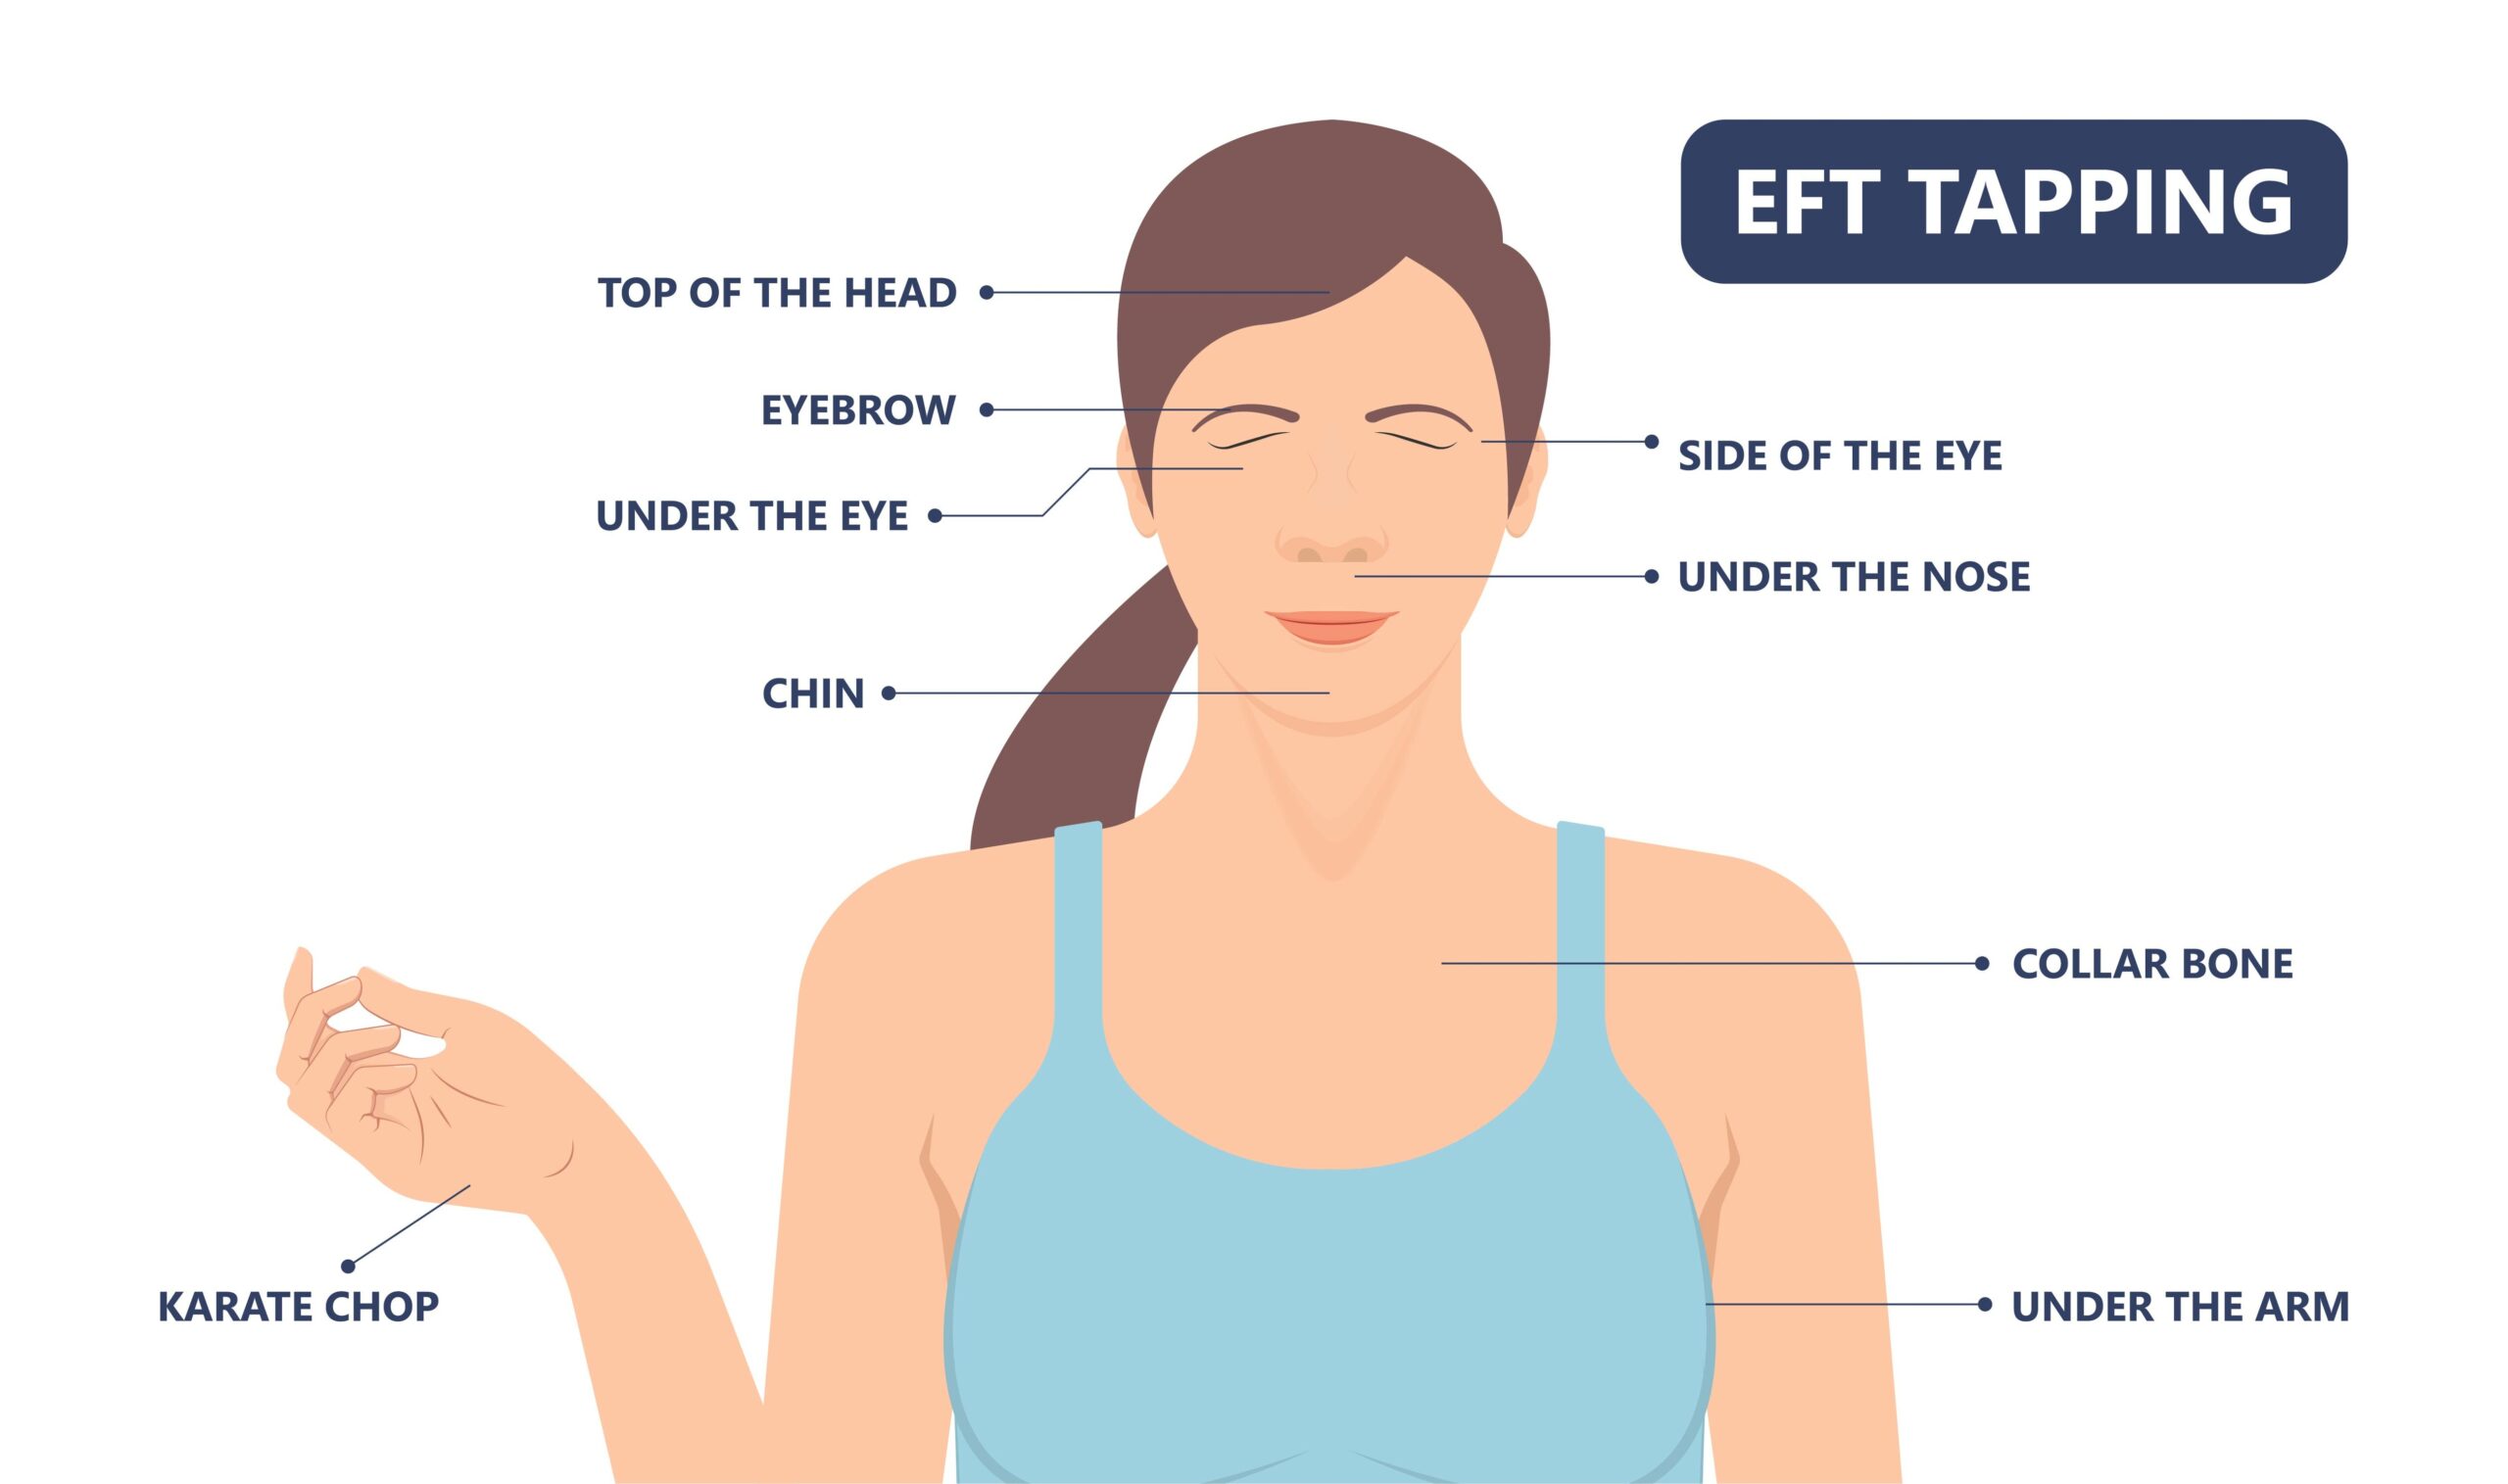 Demonstration of EFT Tapping Points on the Body